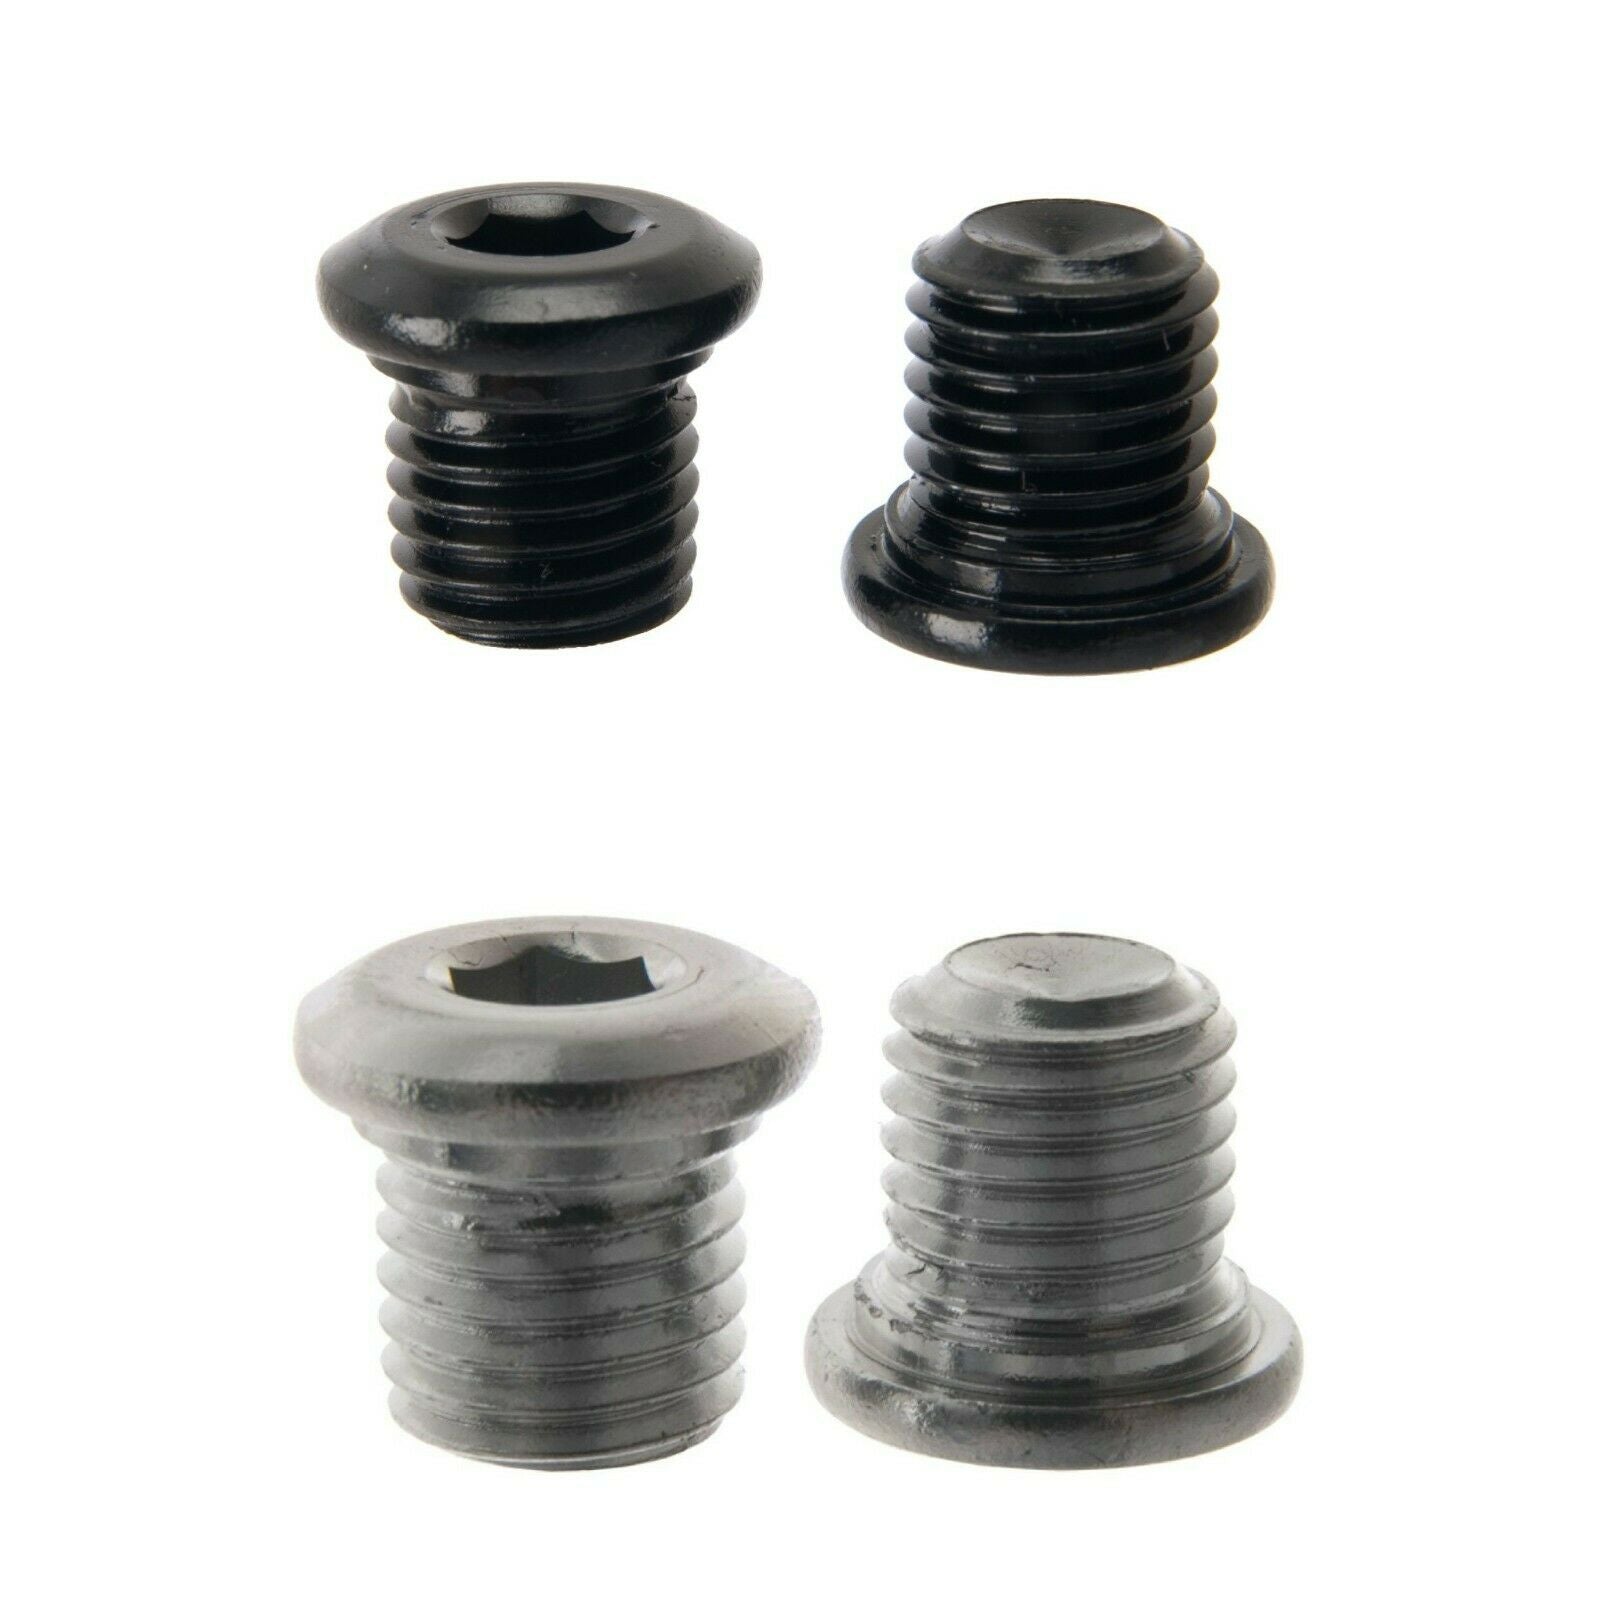 V Brake / Cantilever Boss Blanking Bolts / Plugs - Black Or Silver - M10 or M8 - Sportandleisure.com (6968053334170)